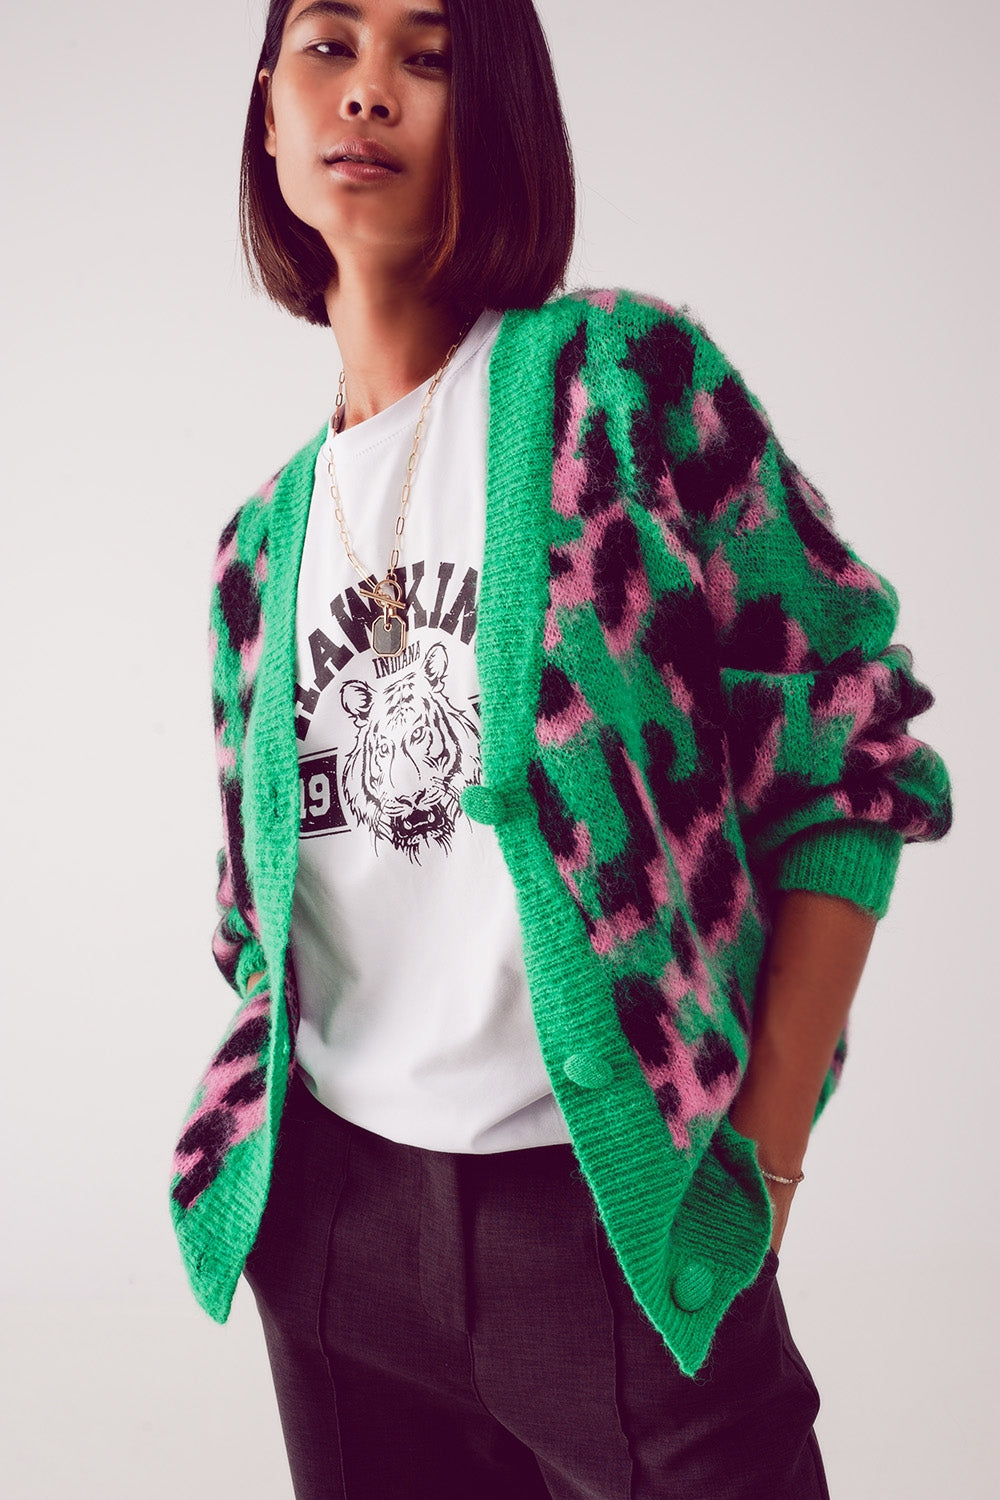 Longline cardigan in green abstract animal